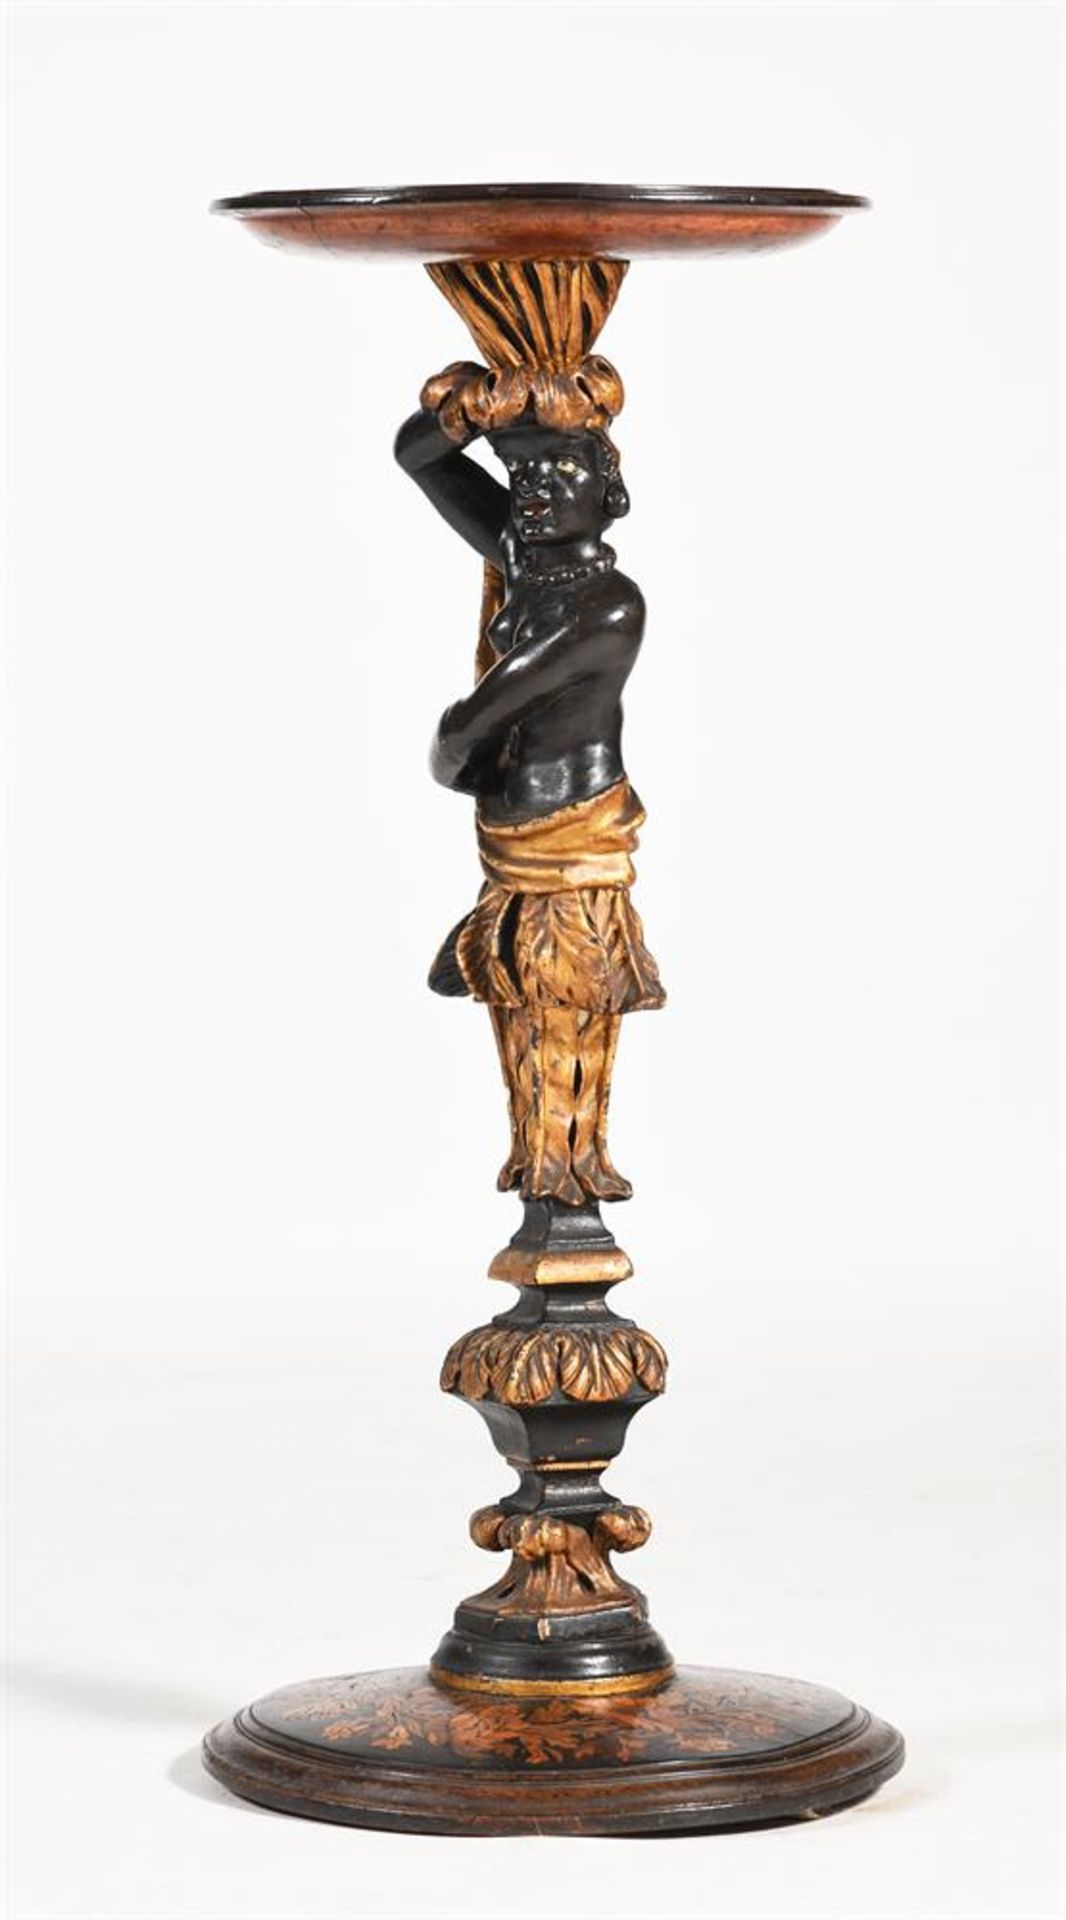 A CONTINENTAL GILTWOOD, EBONISED AND MARQUETRY 'BLACKAMOOR' MARBLE TOP STAND, LATE 17TH/18TH CENTURY - Image 3 of 5